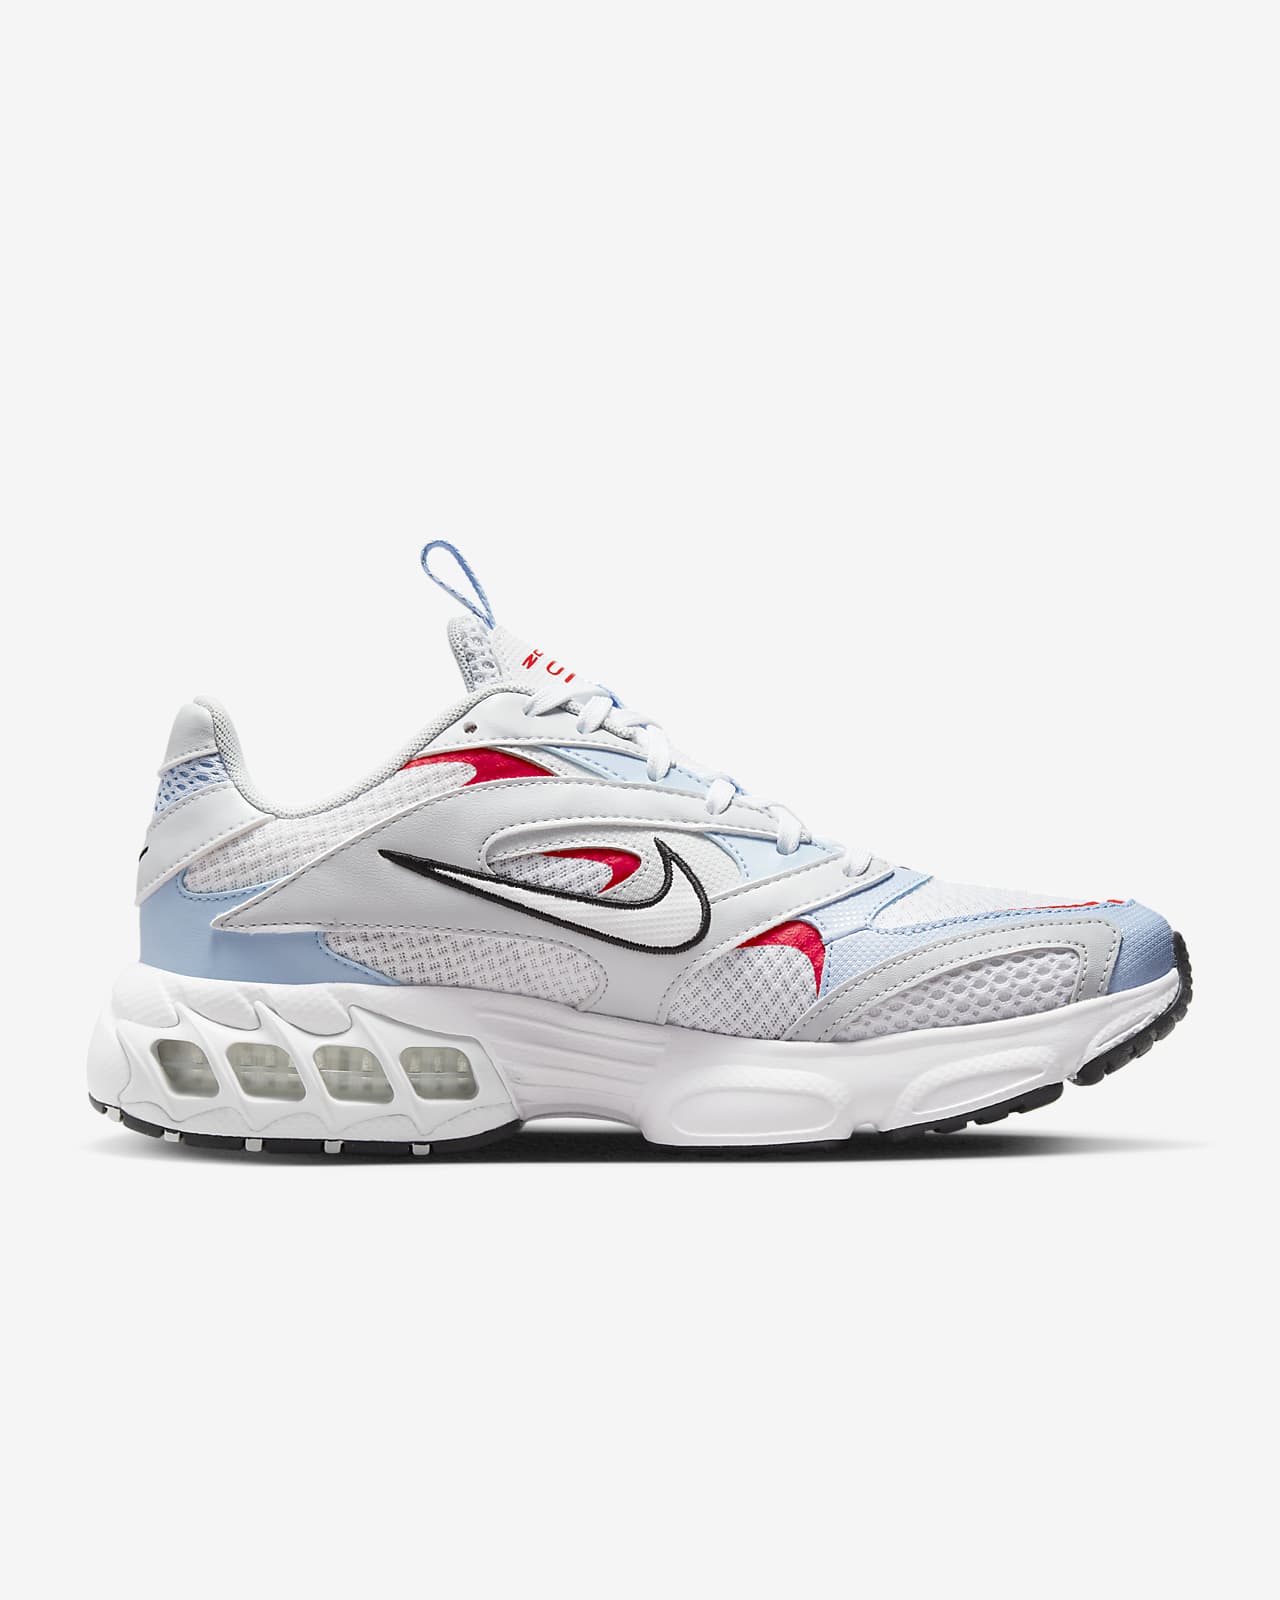 On a large scale gallon Ambiguous Nike Zoom Air Fire Women's Shoes. Nike.com